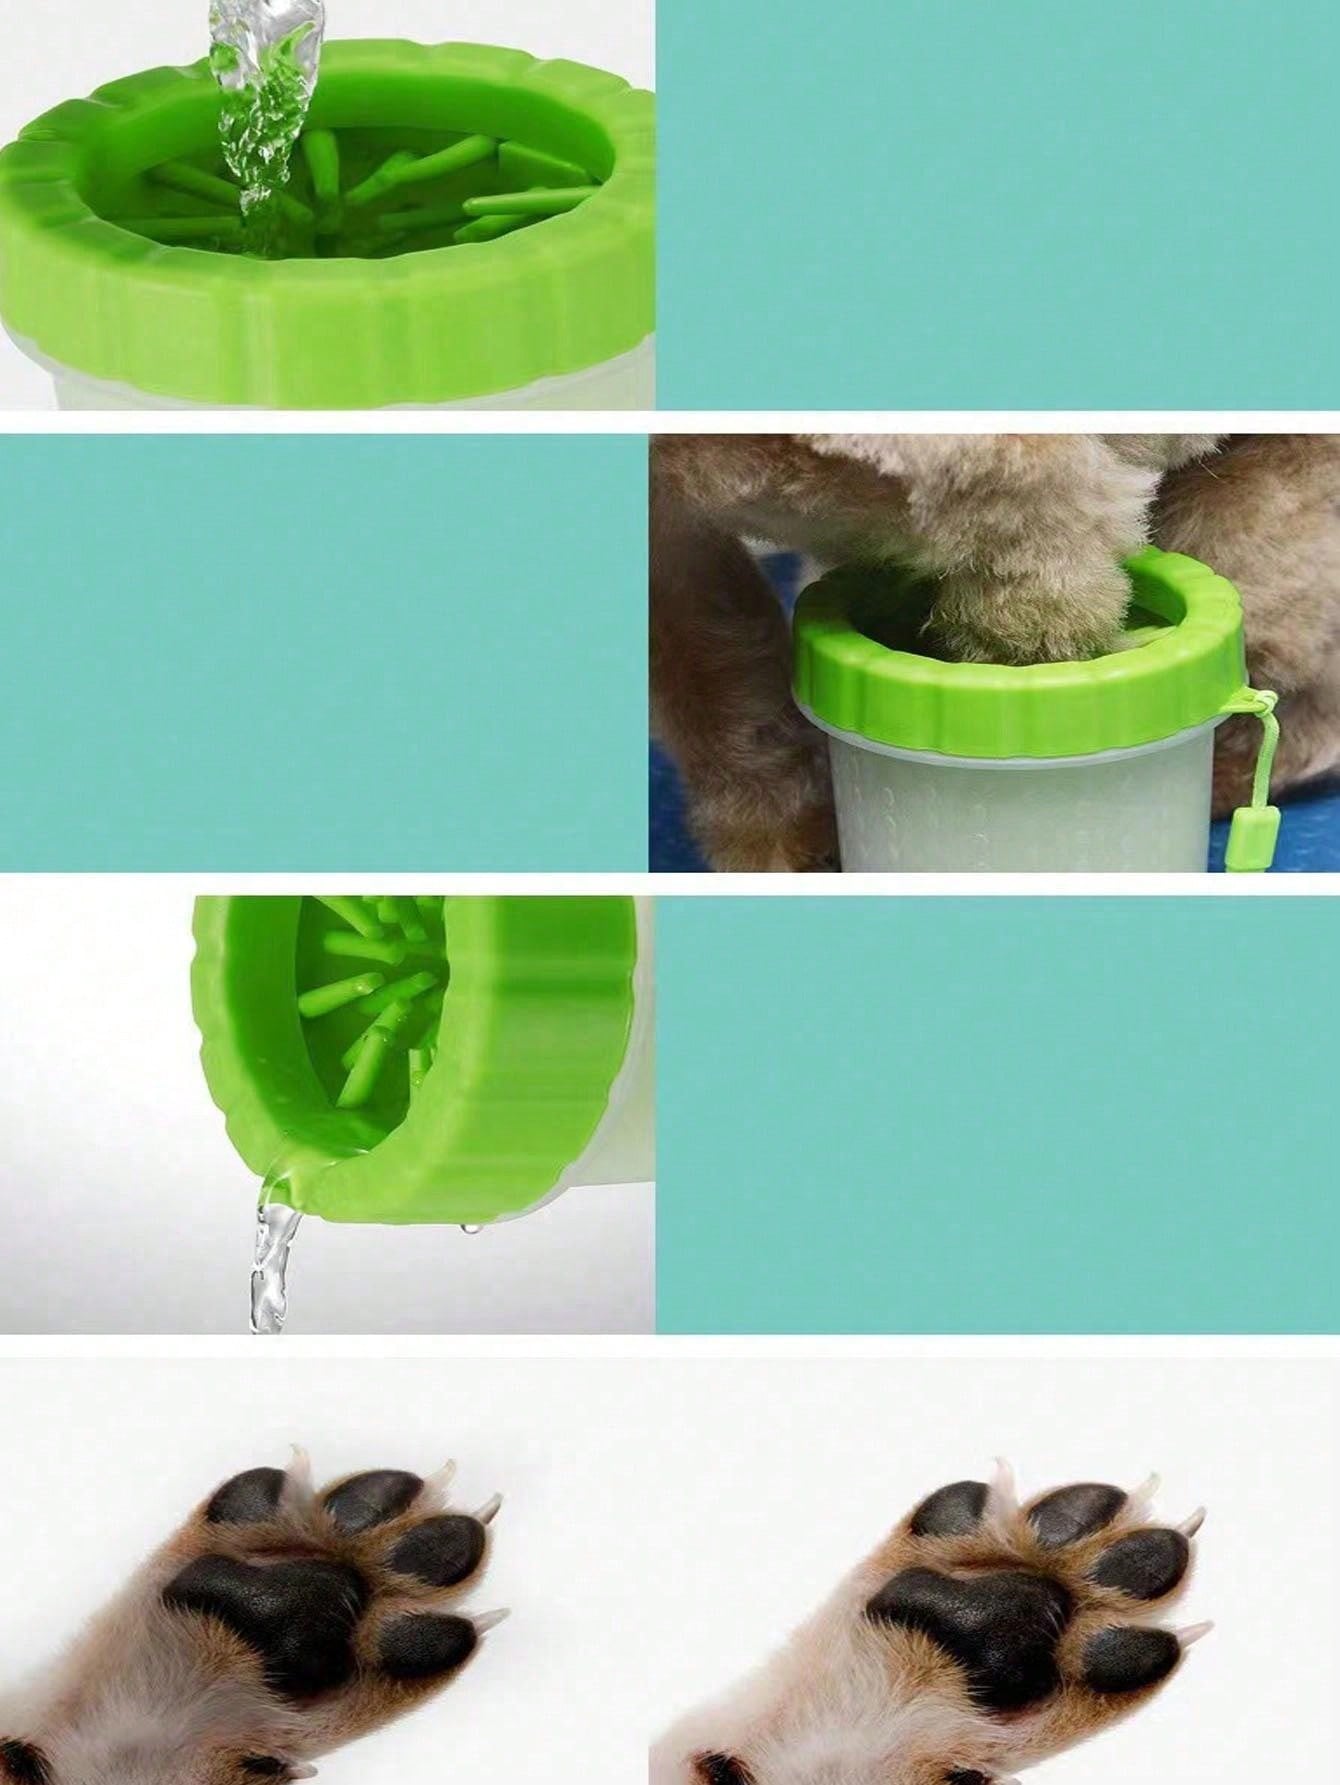 Pet Cleaning No-rinse Foot Washing Cup